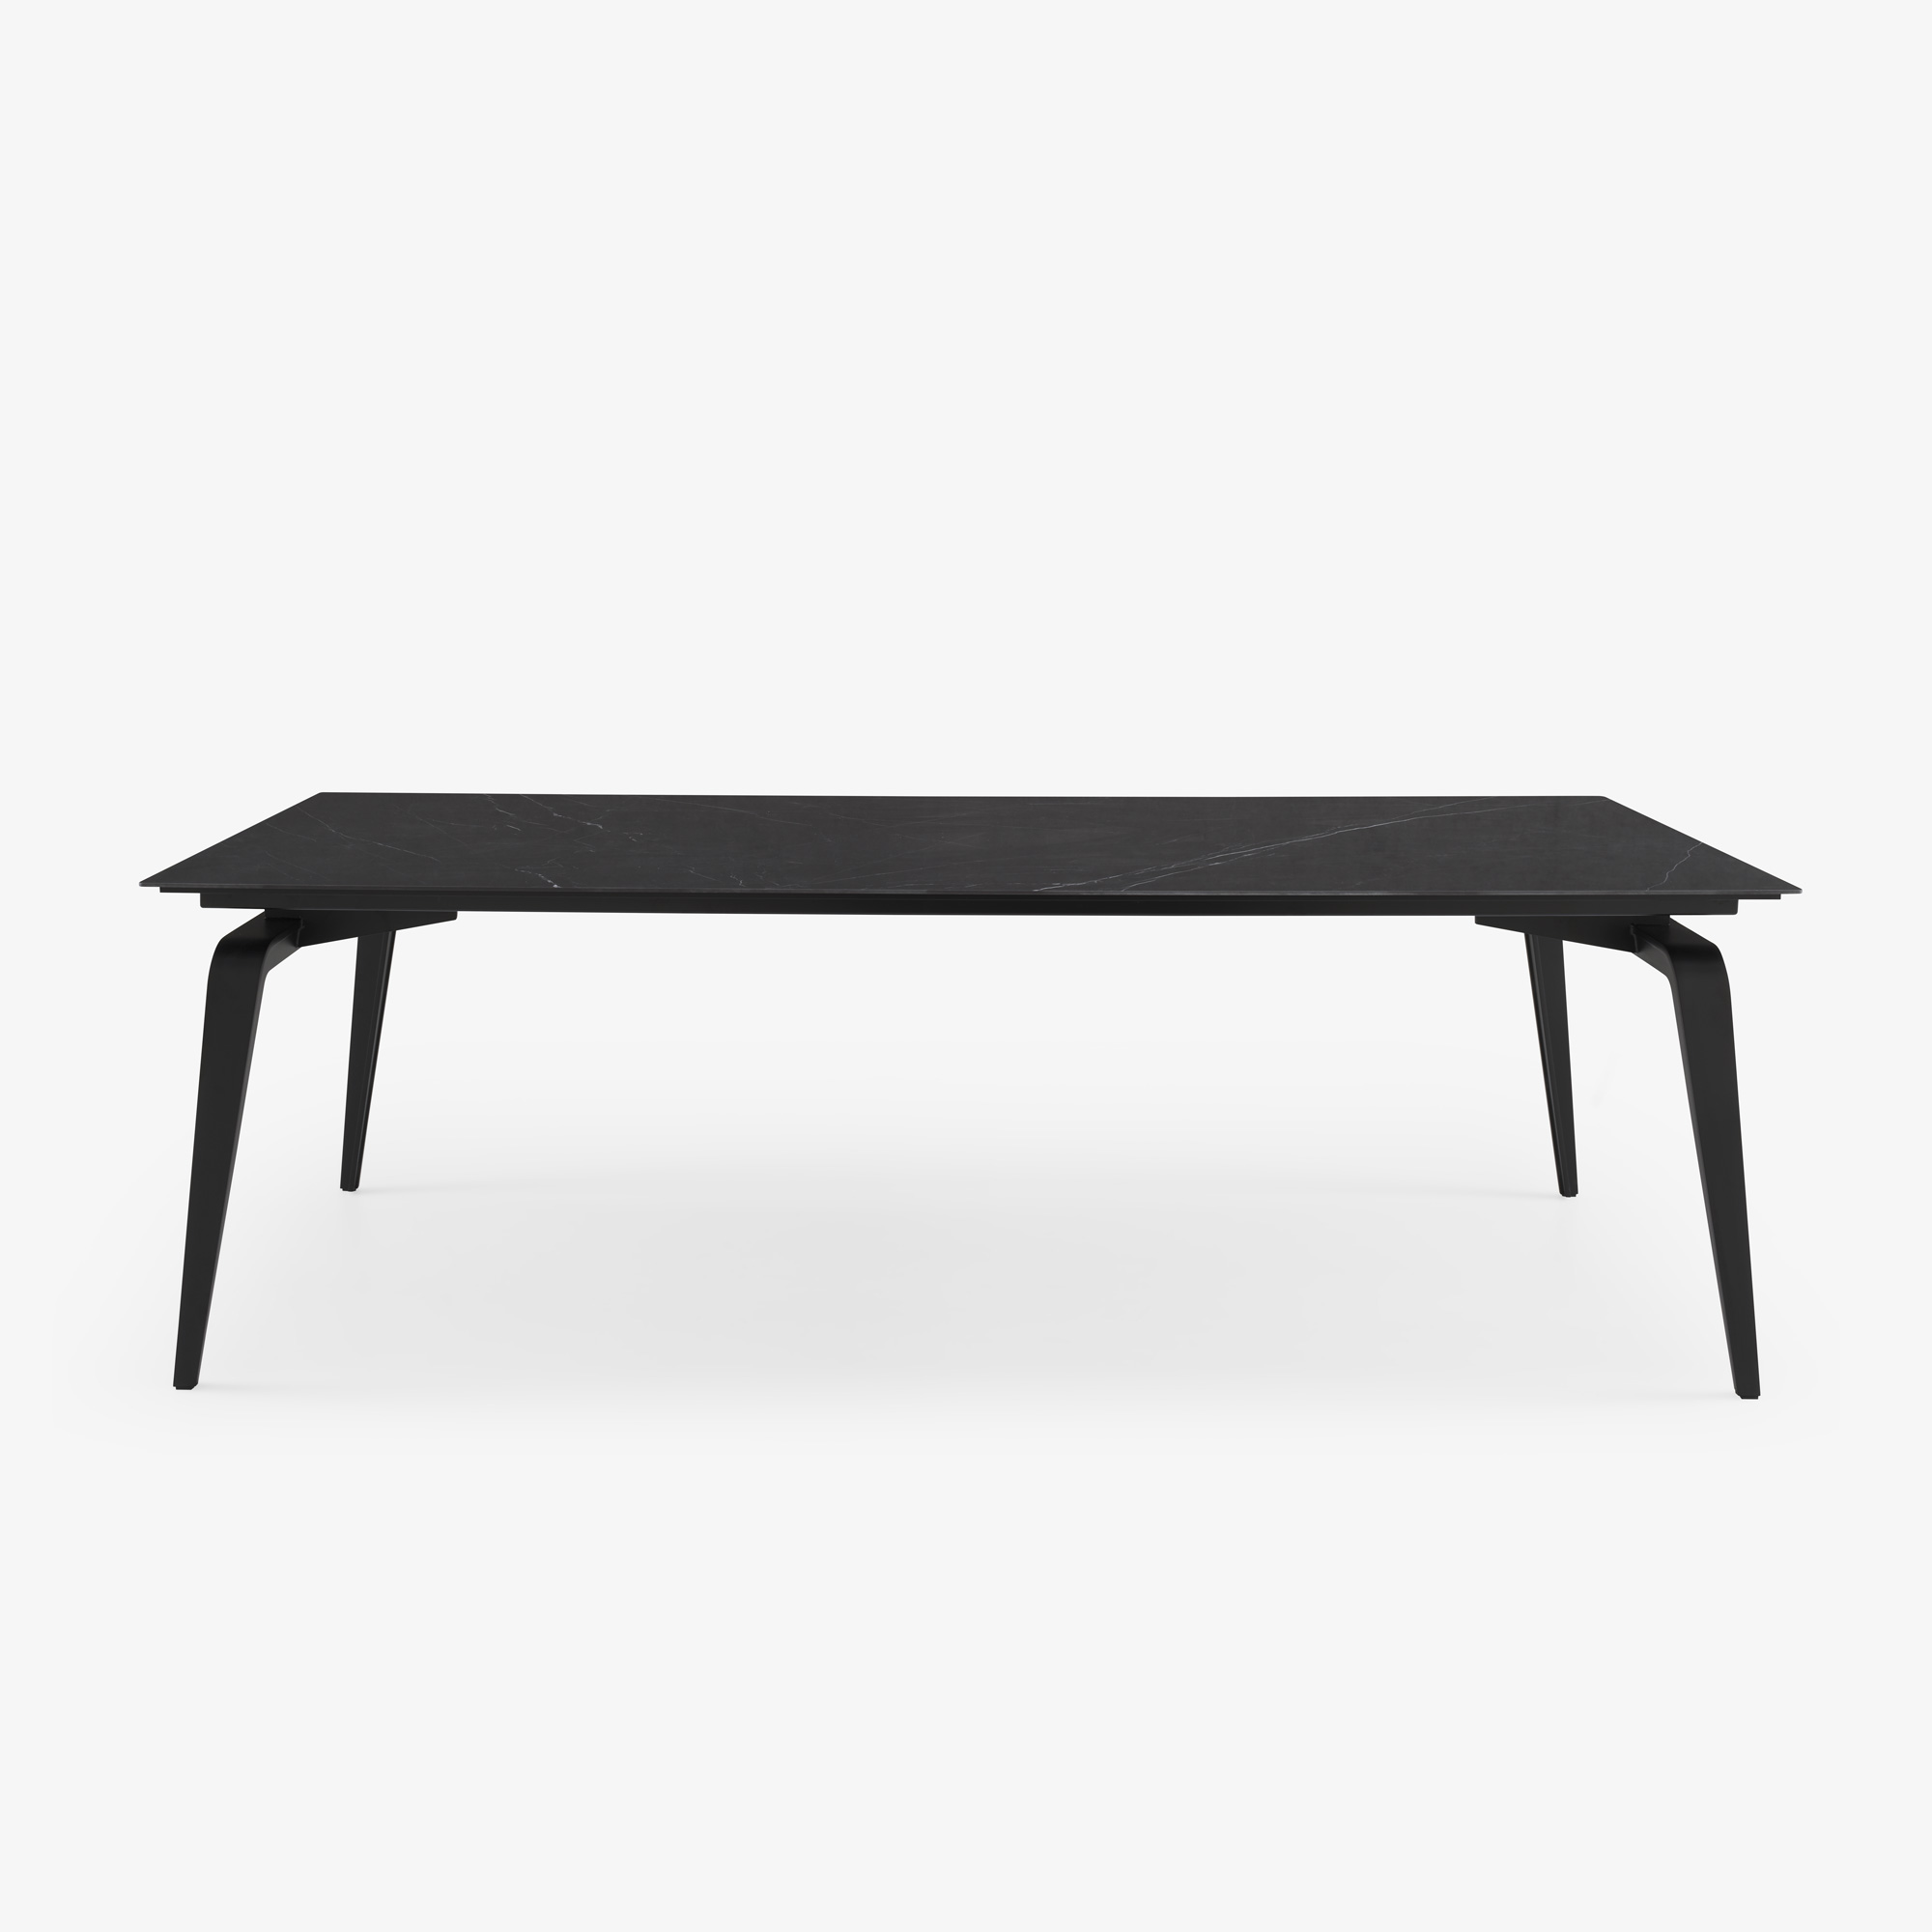 Image Rectangular dining table black lacquered base  1